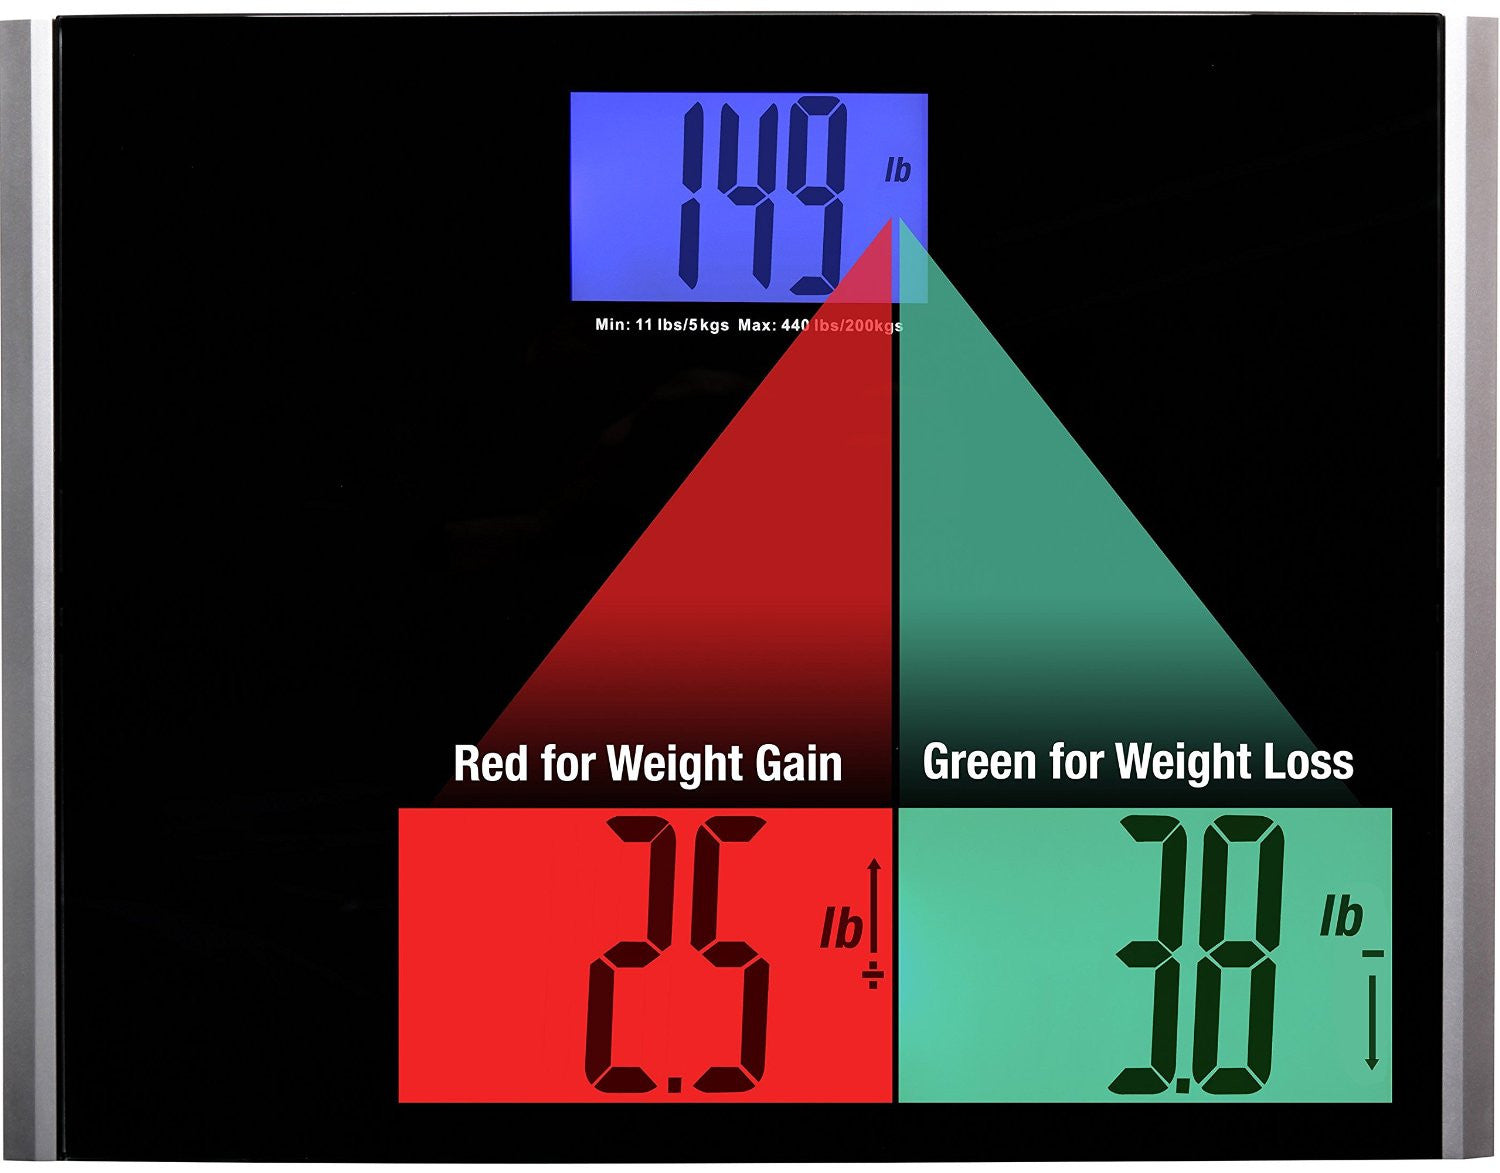 Ozeri Precision II Body Weight Scale (440 lbs Step-on Bath Scale), with  Weight Change Detection